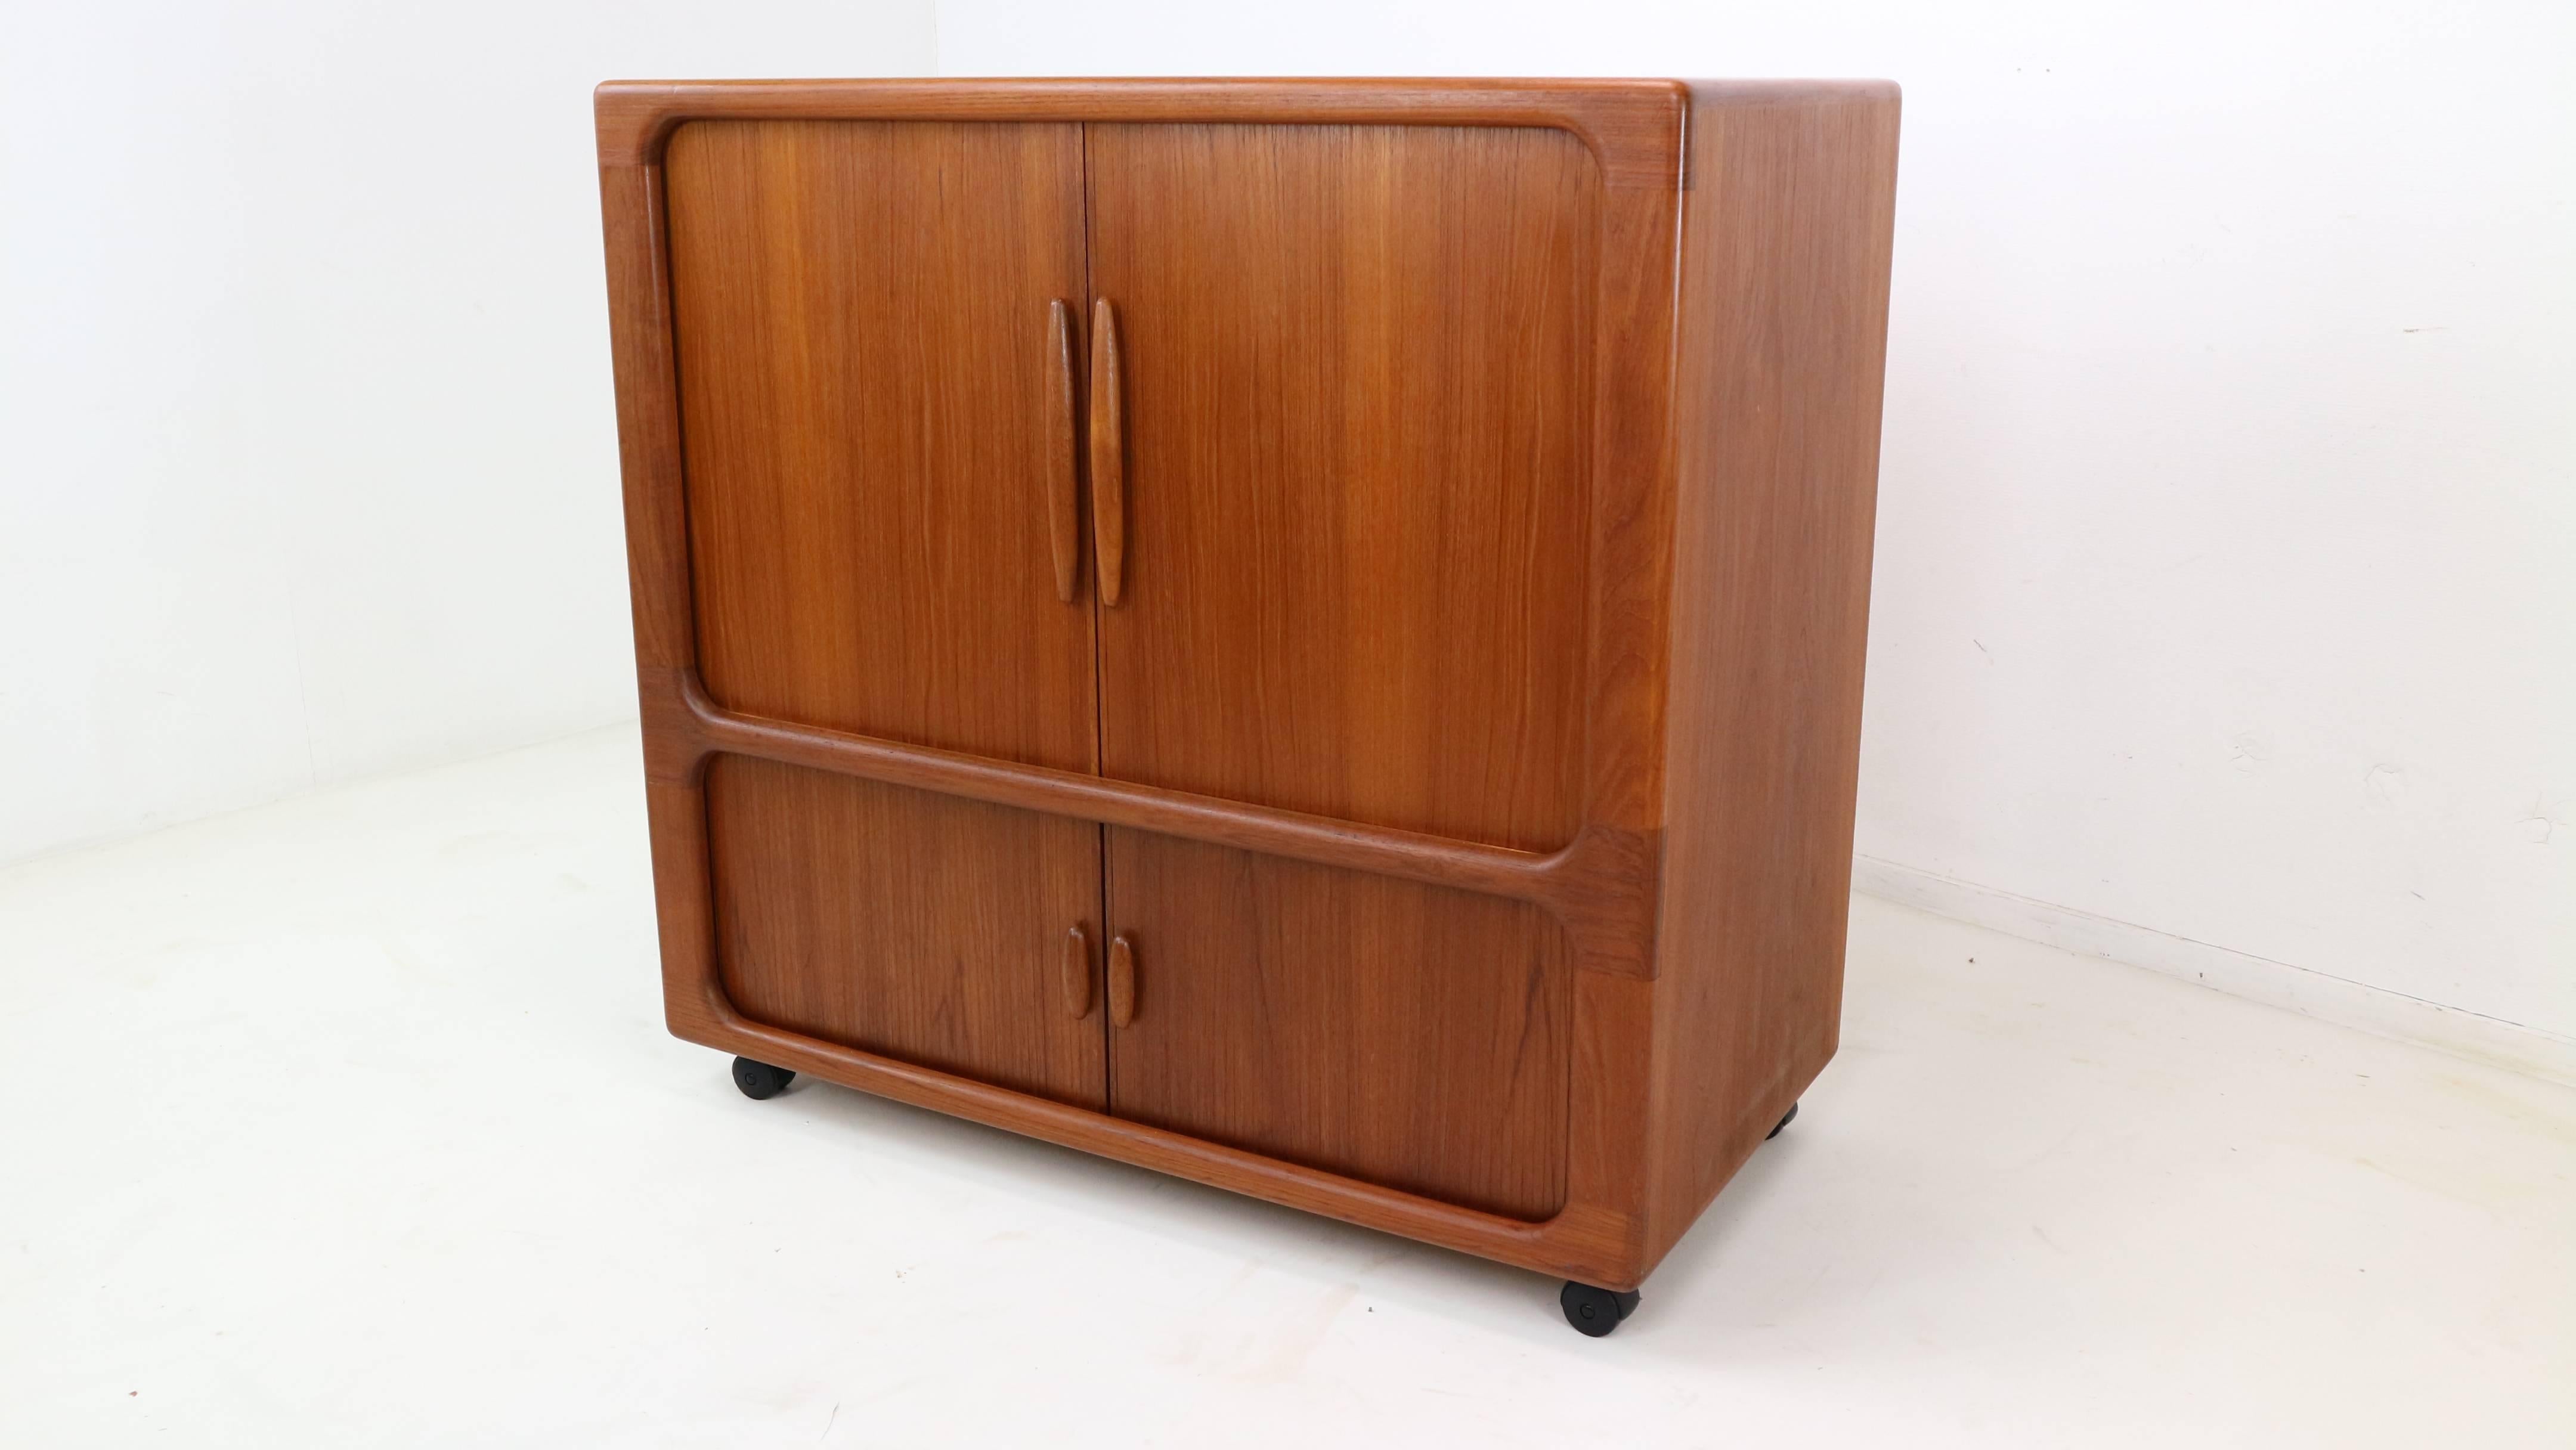 Dyrlund Tambour door Cabinet. 

A fabulous teak cabinet by high-end Danish furniture manufacturer Dyrlund. Features rounded edges
and two pairs of finely crafted tambour doors which slide back smoothly out of sight.
 
There is a large cupboard